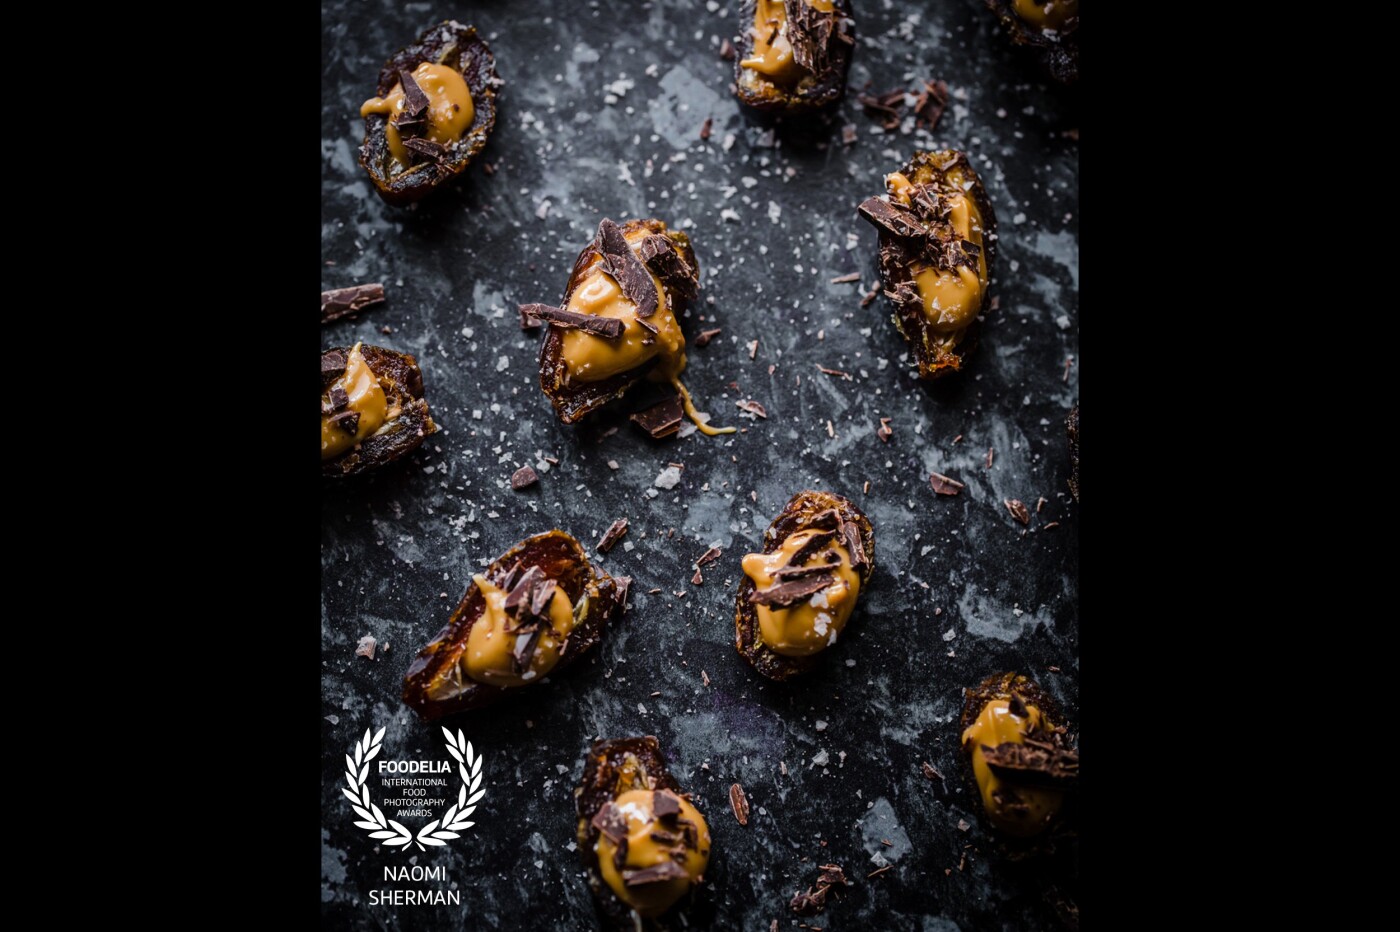 A quick and healthy snack of Medjool dates, natural peanut butter, dark chocolate shavings and a sprinkle of sea salt.<br />
Shot in my studio, with natural back lighting.<br />
